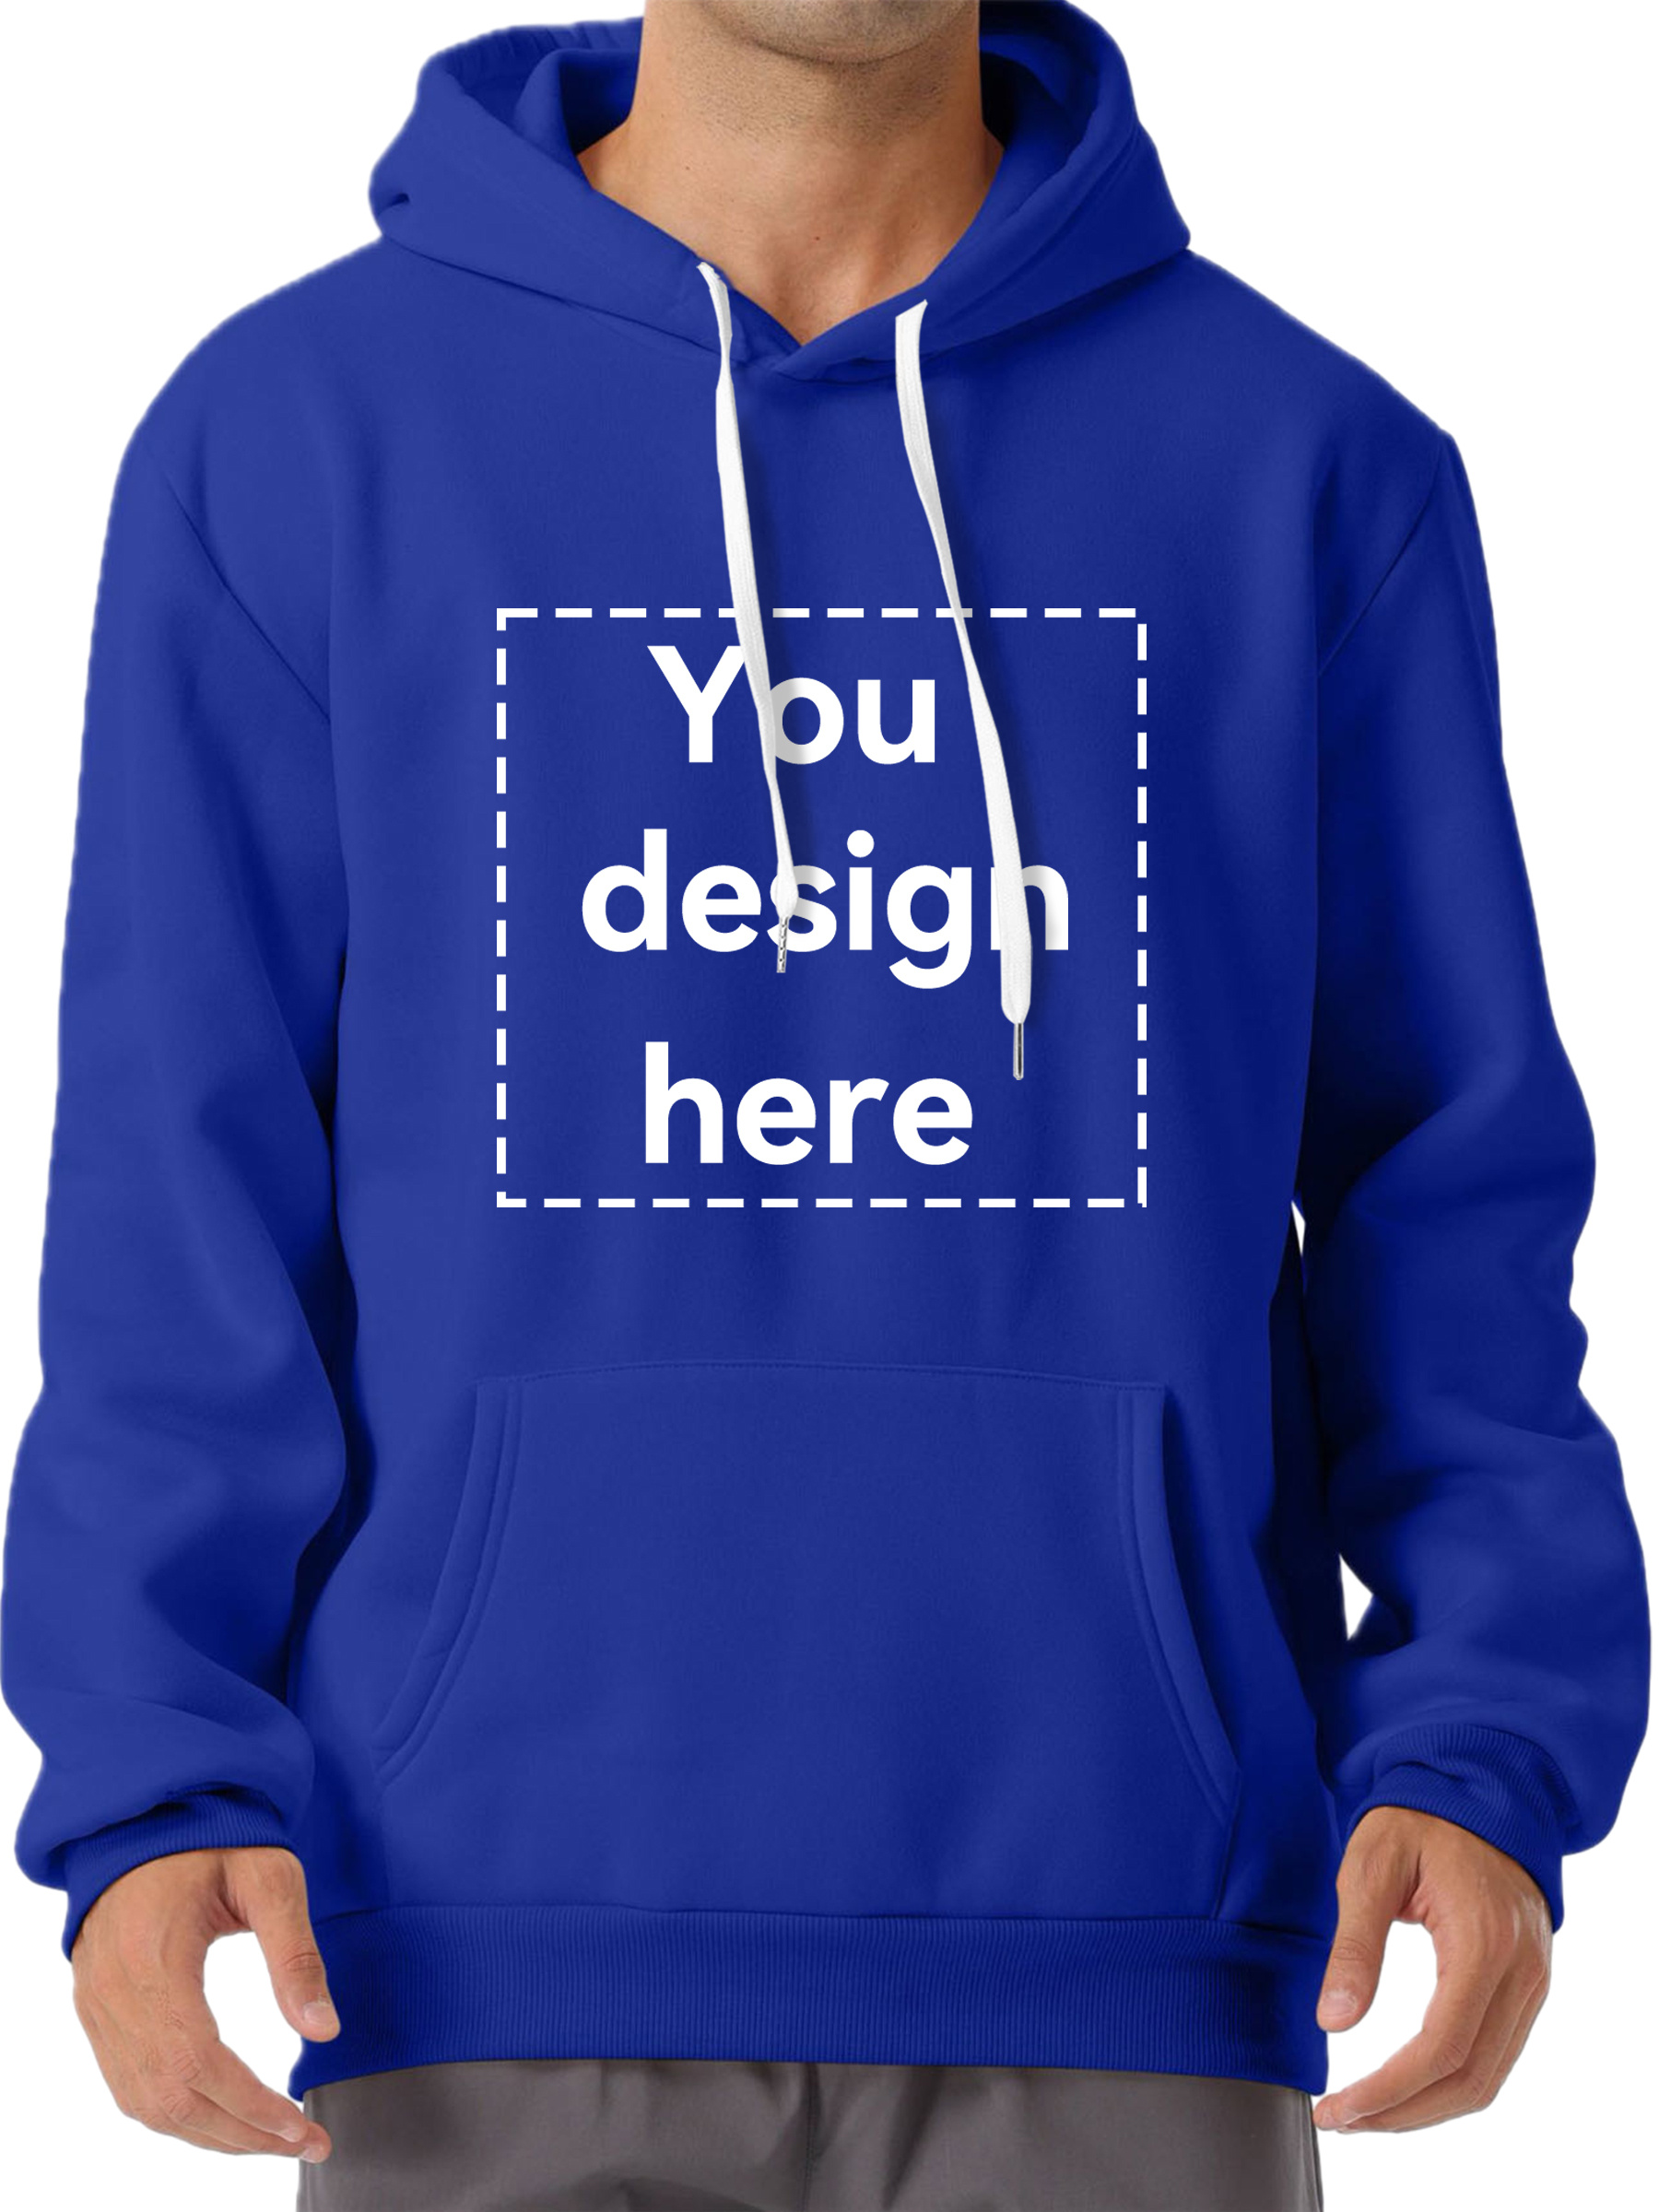 you design here letter print customized kangaroo pocket hoodie casual long sleeve hoodies pullover sweatshirt mens clothing for fall winter details 10